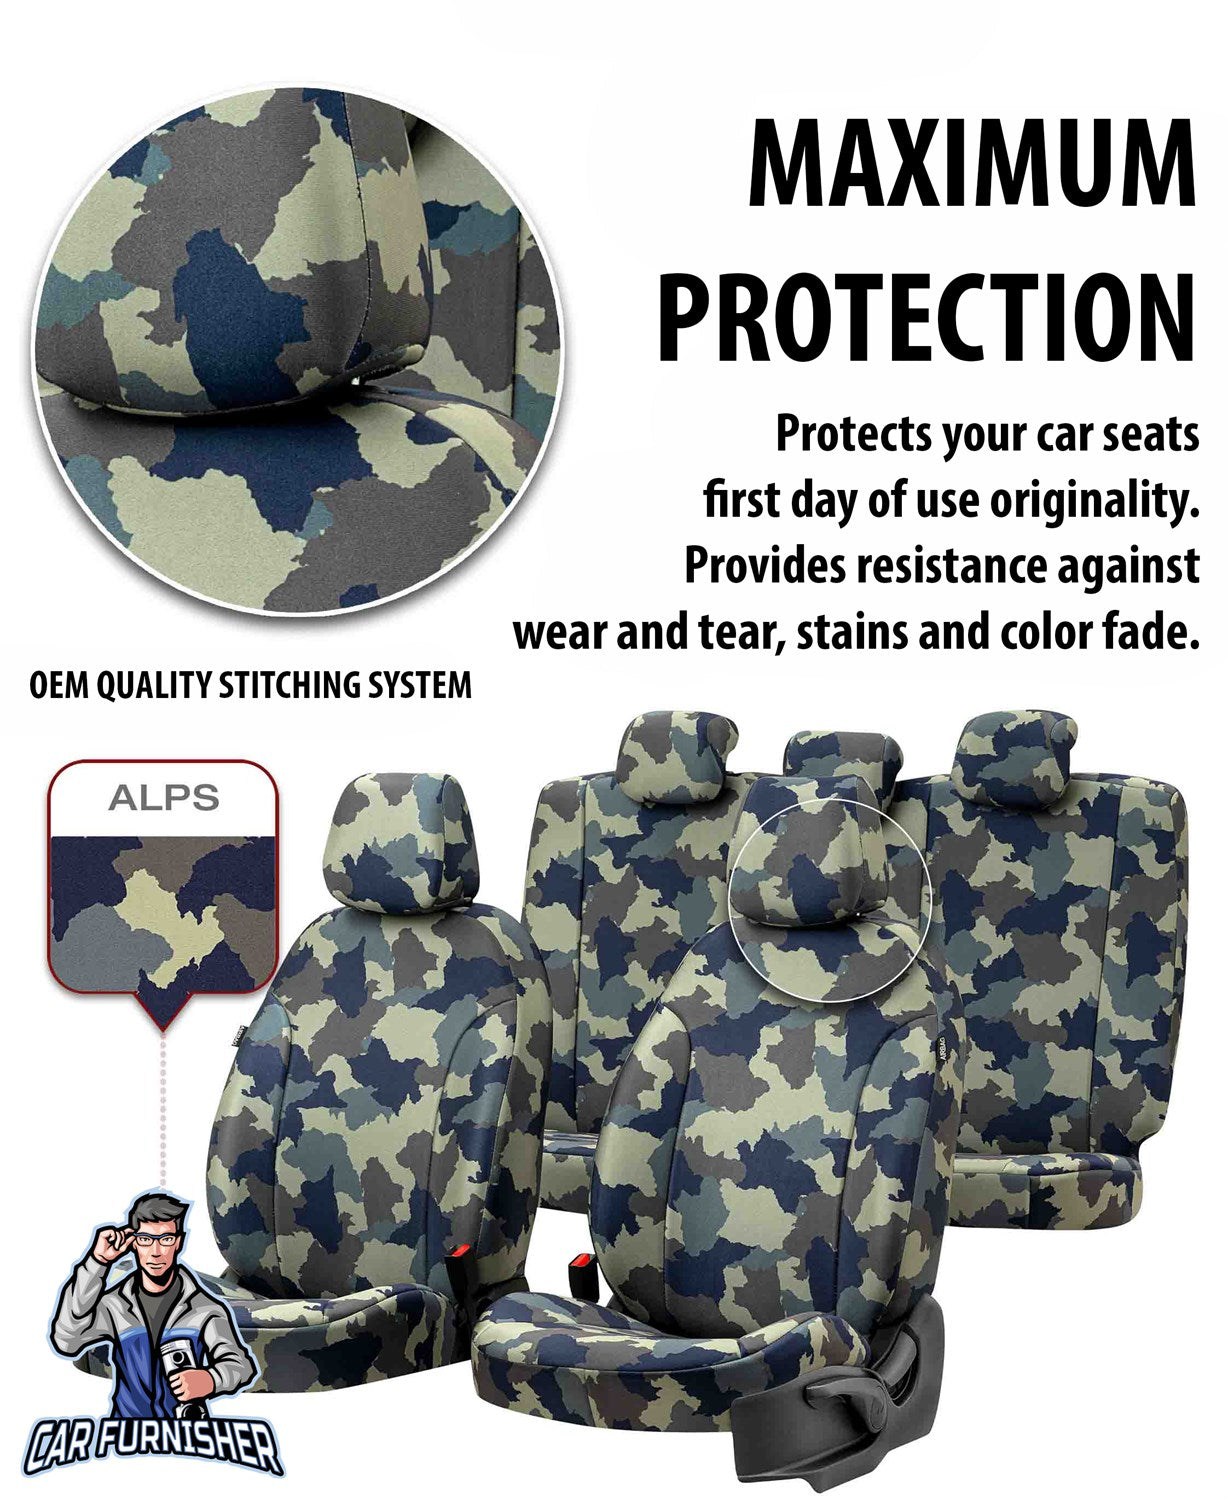 Nissan Primera Seat Covers Camouflage Waterproof Design Montblanc Camo Waterproof Fabric